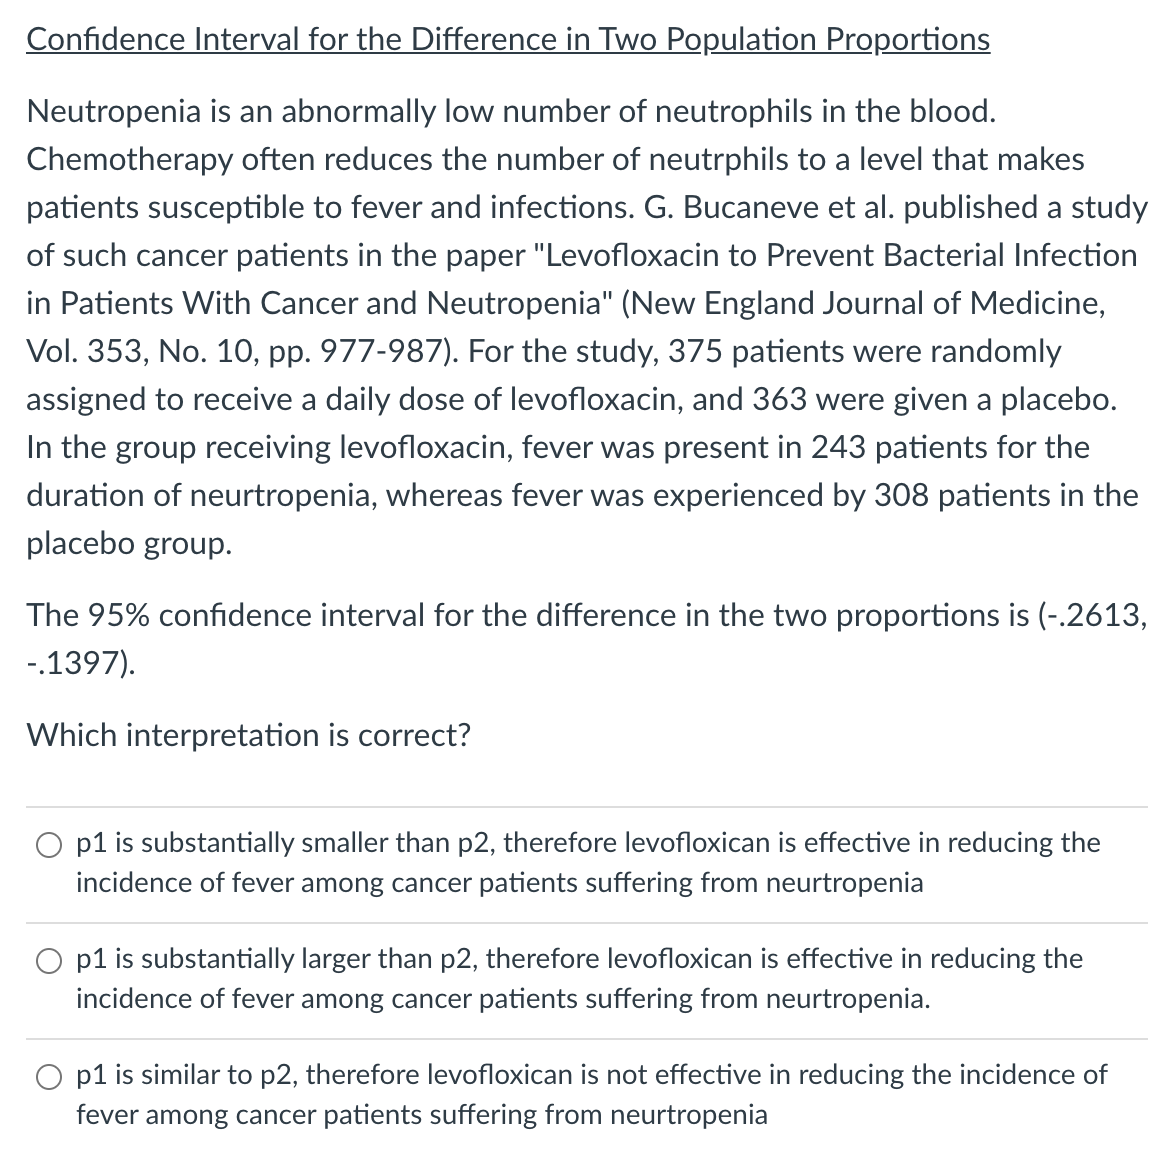 Confidence Interval for the Difference in Two Population Proportions
Neutropenia is an abnormally low number of neutrophils in the blood.
Chemotherapy often reduces the number of neutrphils to a level that makes
patients susceptible to fever and infections. G. Bucaneve et al. published a study
of such cancer patients in the paper "Levofloxacin to Prevent Bacterial Infection
in Patients With Cancer and Neutropenia" (New England Journal of Medicine,
Vol. 353, No. 10, pp. 977-987). For the study, 375 patients were randomly
assigned to receive a daily dose of levofloxacin, and 363 were given a placebo.
In the group receiving levofloxacin, fever was present in 243 patients for the
duration of neurtropenia, whereas fever was experienced by 308 patients in the
placebo group.
The 95% confidence interval for the difference in the two proportions is (-.2613,
-.1397).
Which interpretation is correct?
O p1 is substantially smaller than p2, therefore levofloxican is effective in reducing the
incidence of fever among cancer patients suffering from neurtropenia
p1 is substantially larger than p2, therefore levofloxican is effective in reducing the
incidence of fever among cancer patients suffering from neurtropenia.
p1 is similar to p2, therefore levofloxican is not effective in reducing the incidence of
fever among cancer patients suffering from neurtropenia
